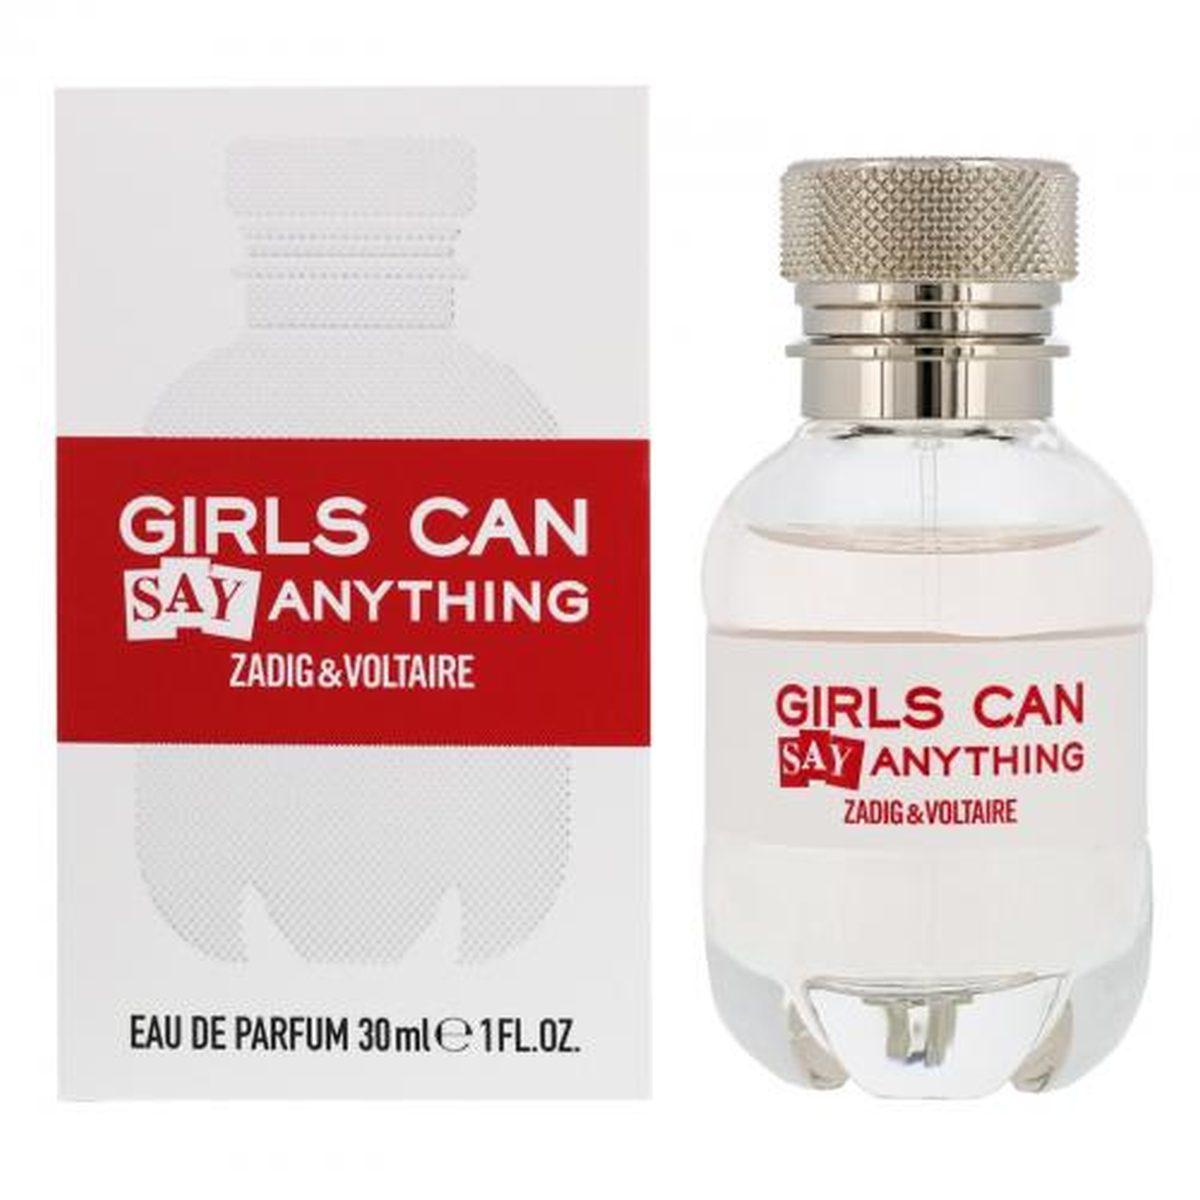 Girls can say anything 30 ml